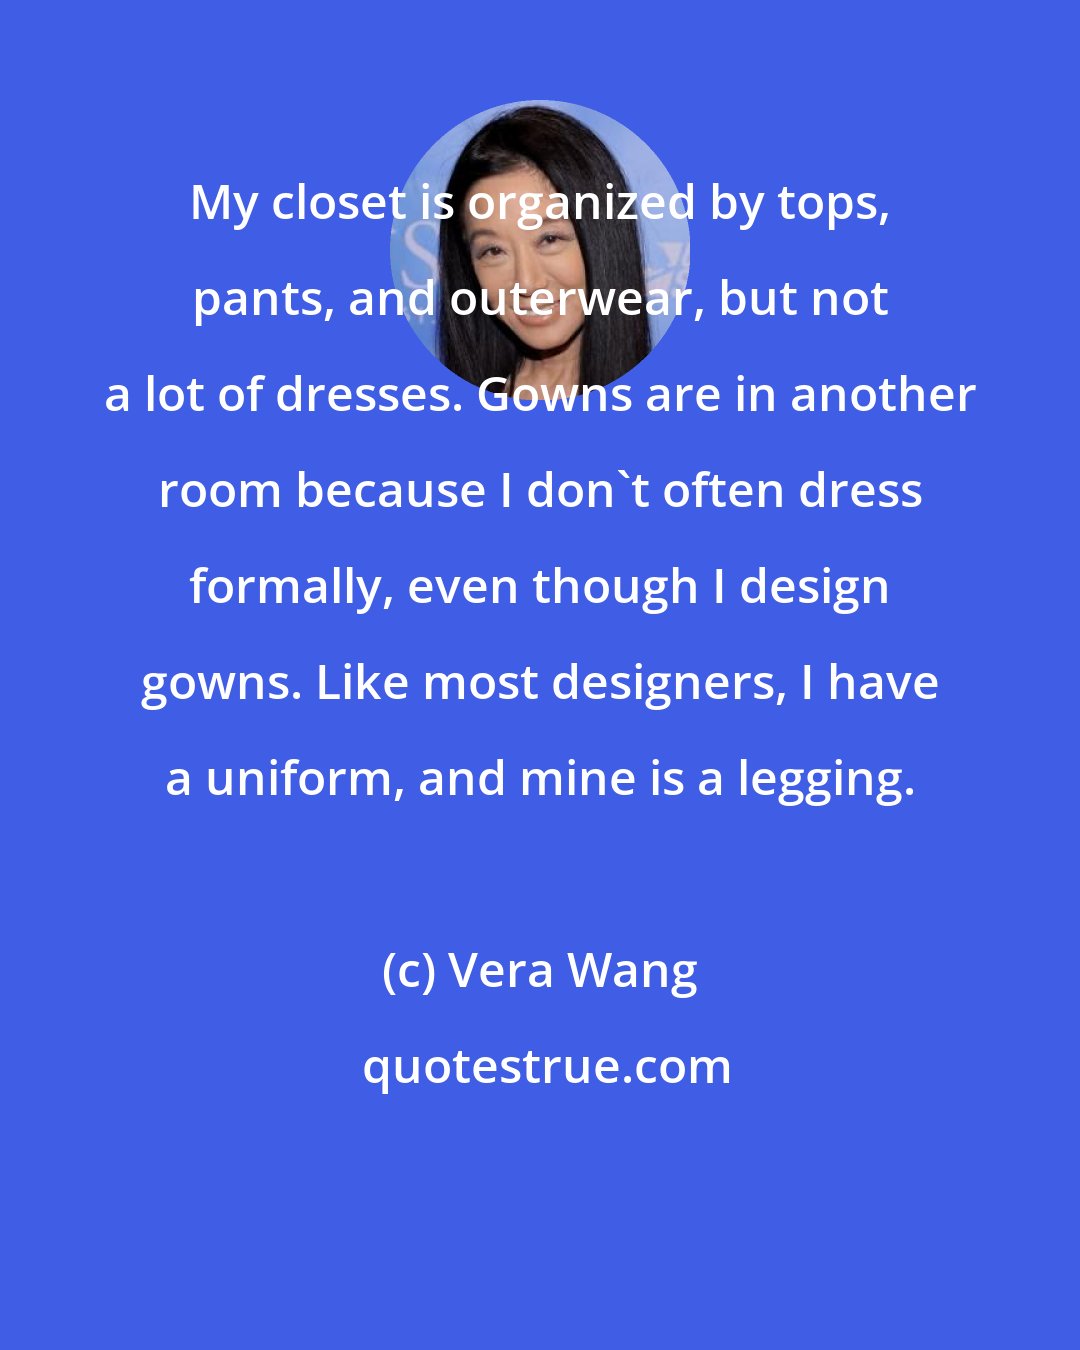 Vera Wang: My closet is organized by tops, pants, and outerwear, but not a lot of dresses. Gowns are in another room because I don't often dress formally, even though I design gowns. Like most designers, I have a uniform, and mine is a legging.